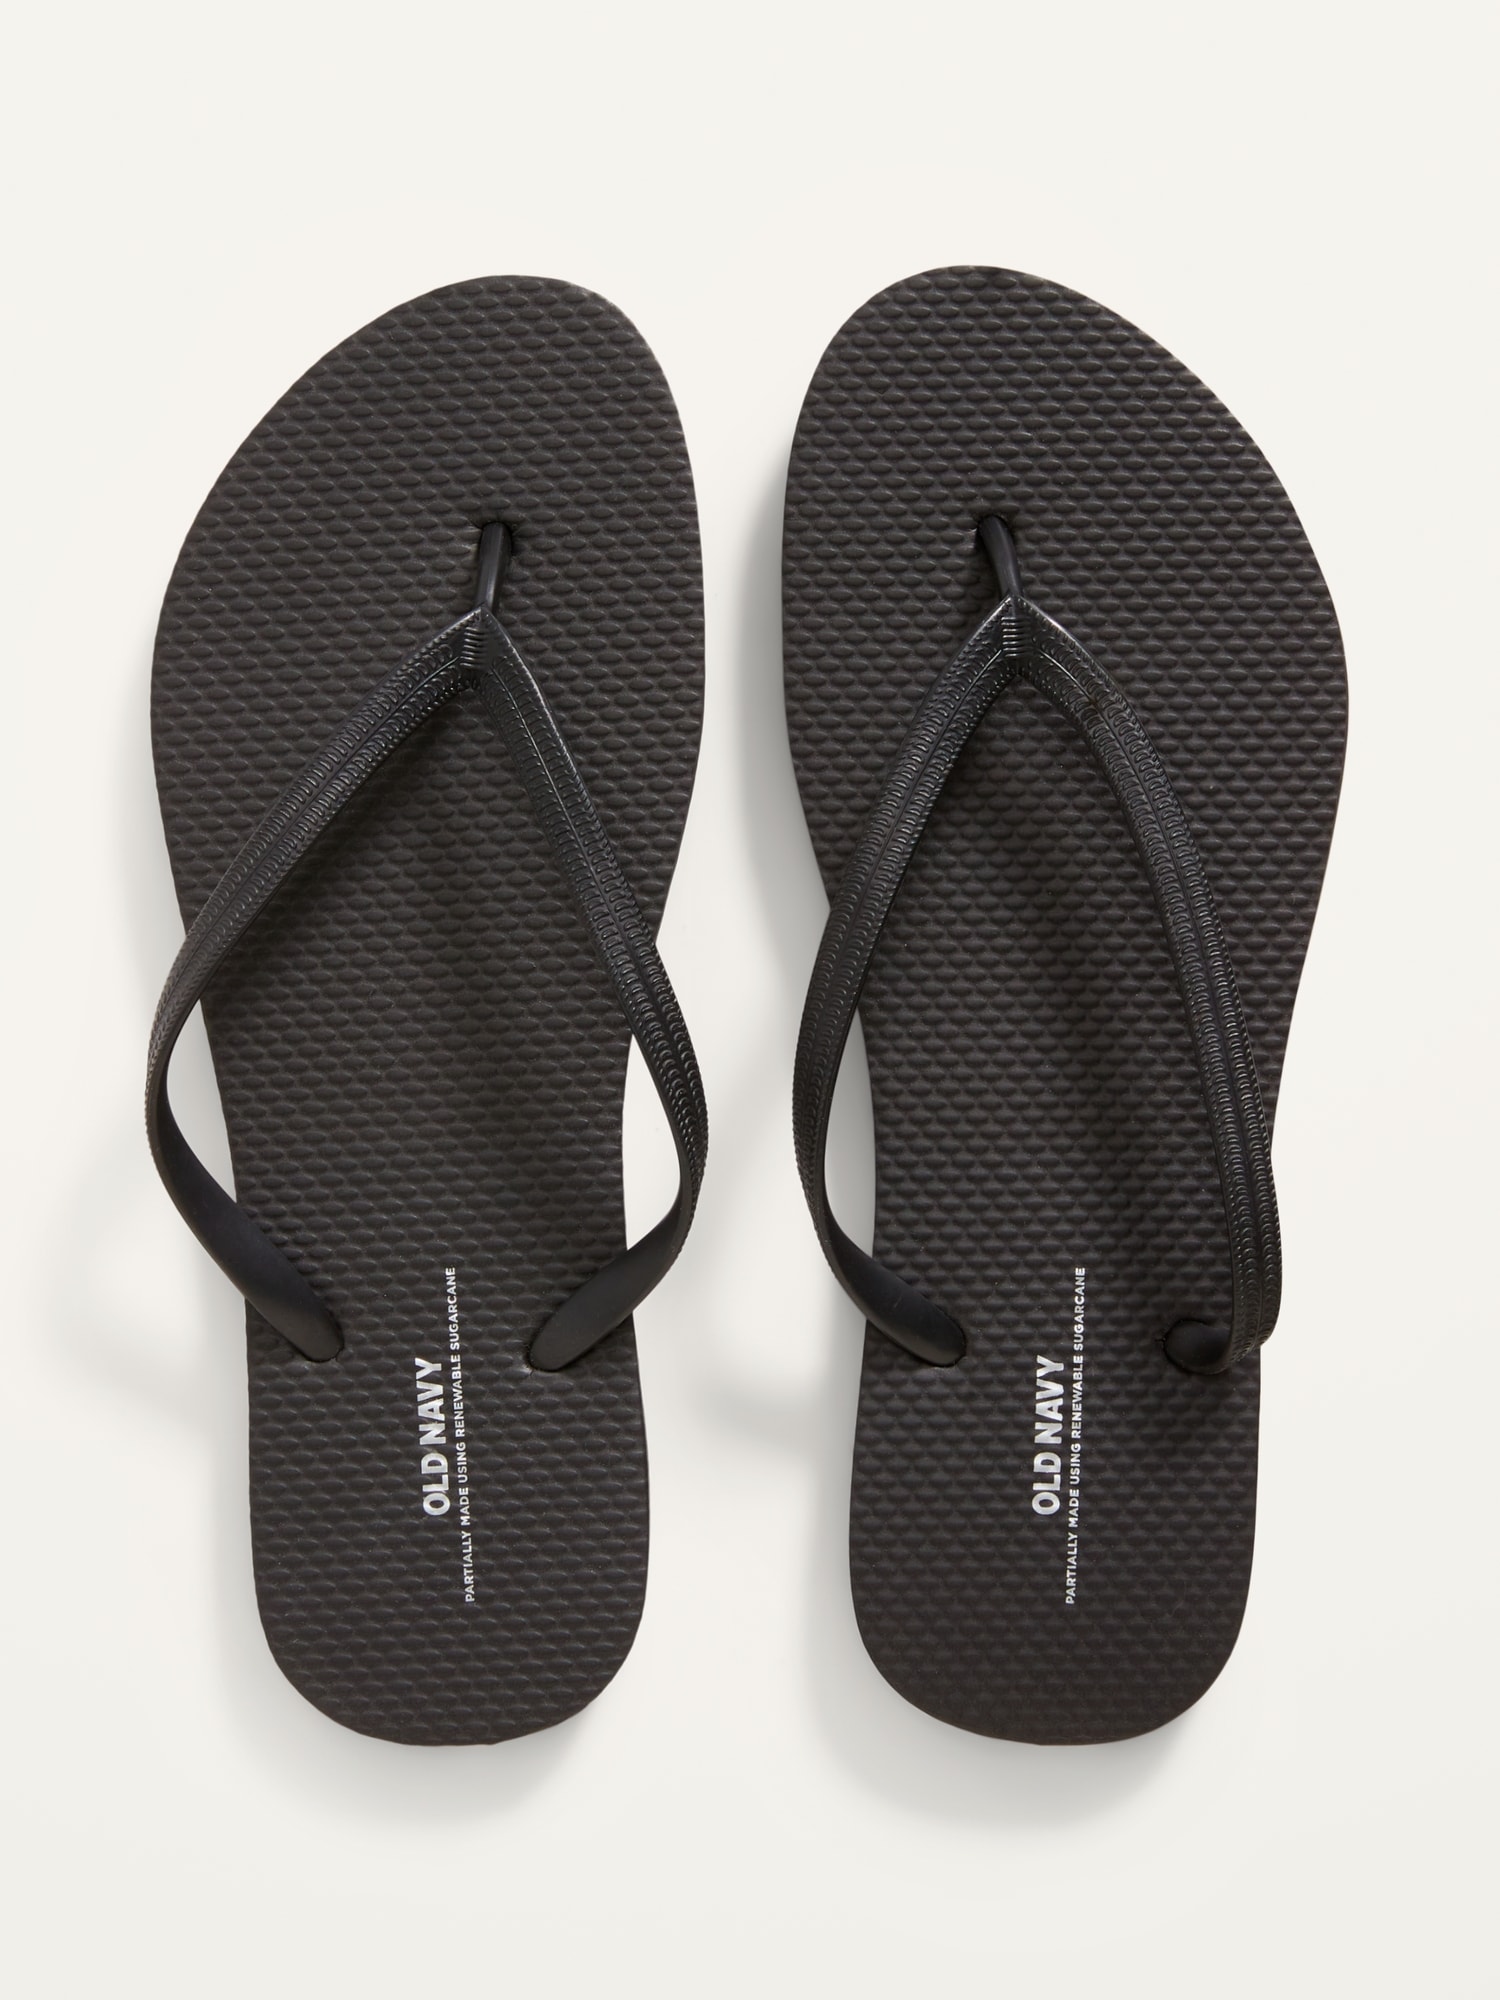 Flip-Flop Sandals (Partially Plant-Based) | Old Navy